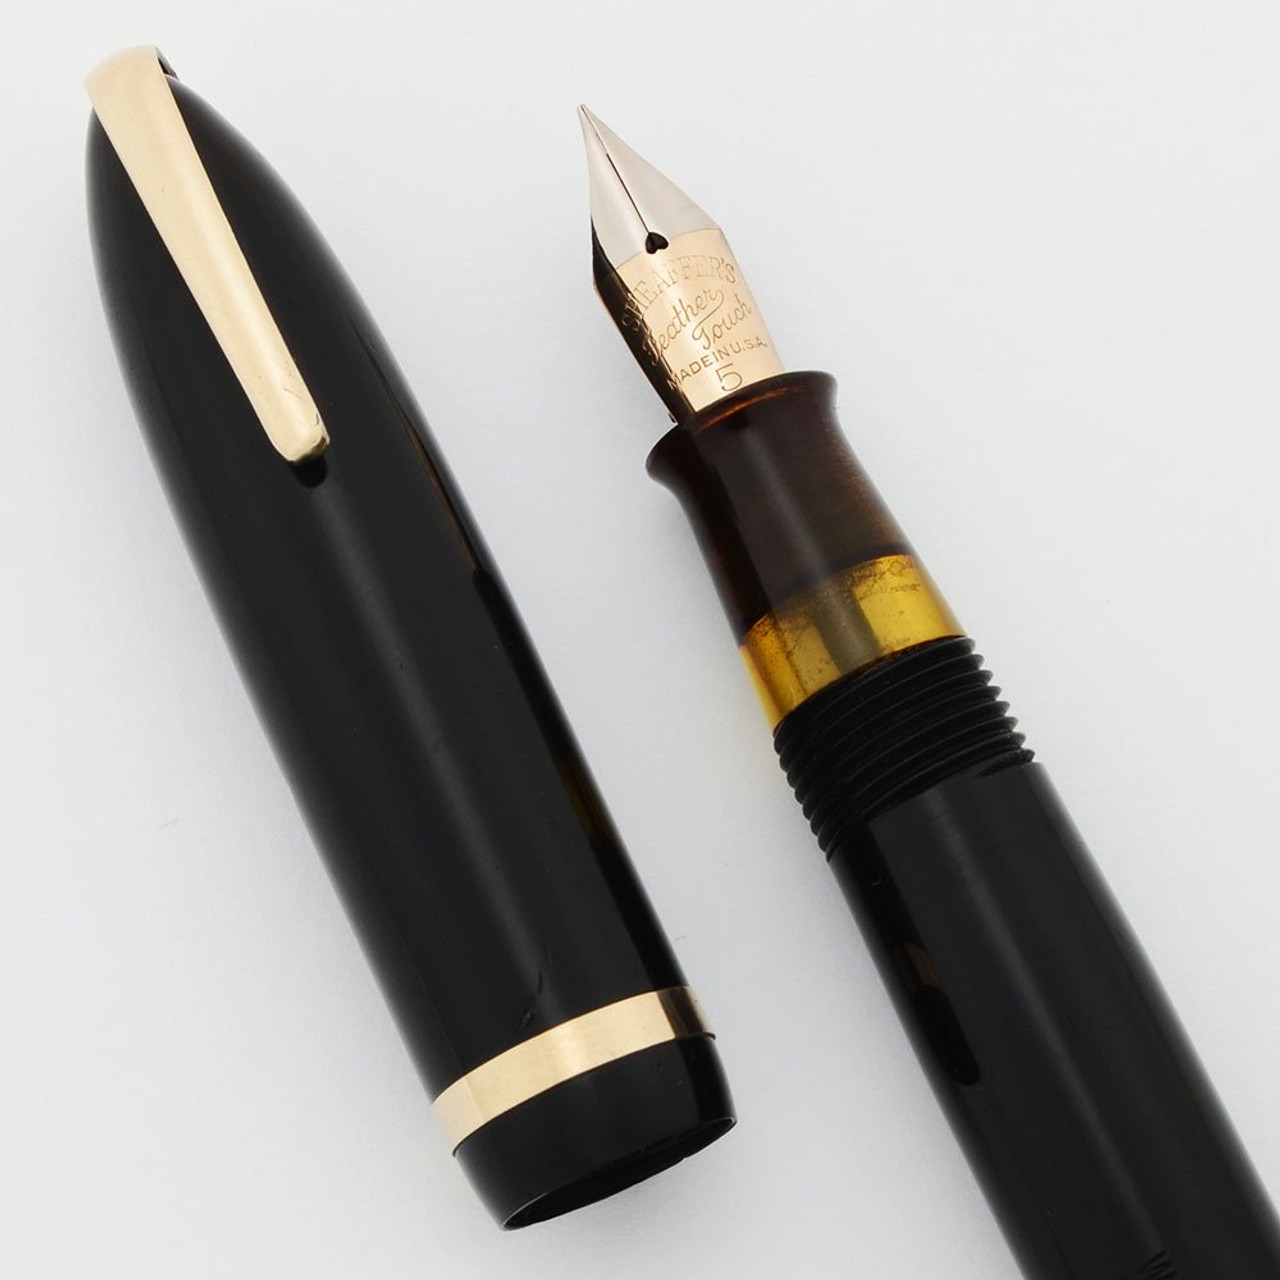 Sheaffer Balance 500 "Admiral" - Black, Military Clip, Lever, Flexible #5 Feather Touch Nib (Excellent, Restored)